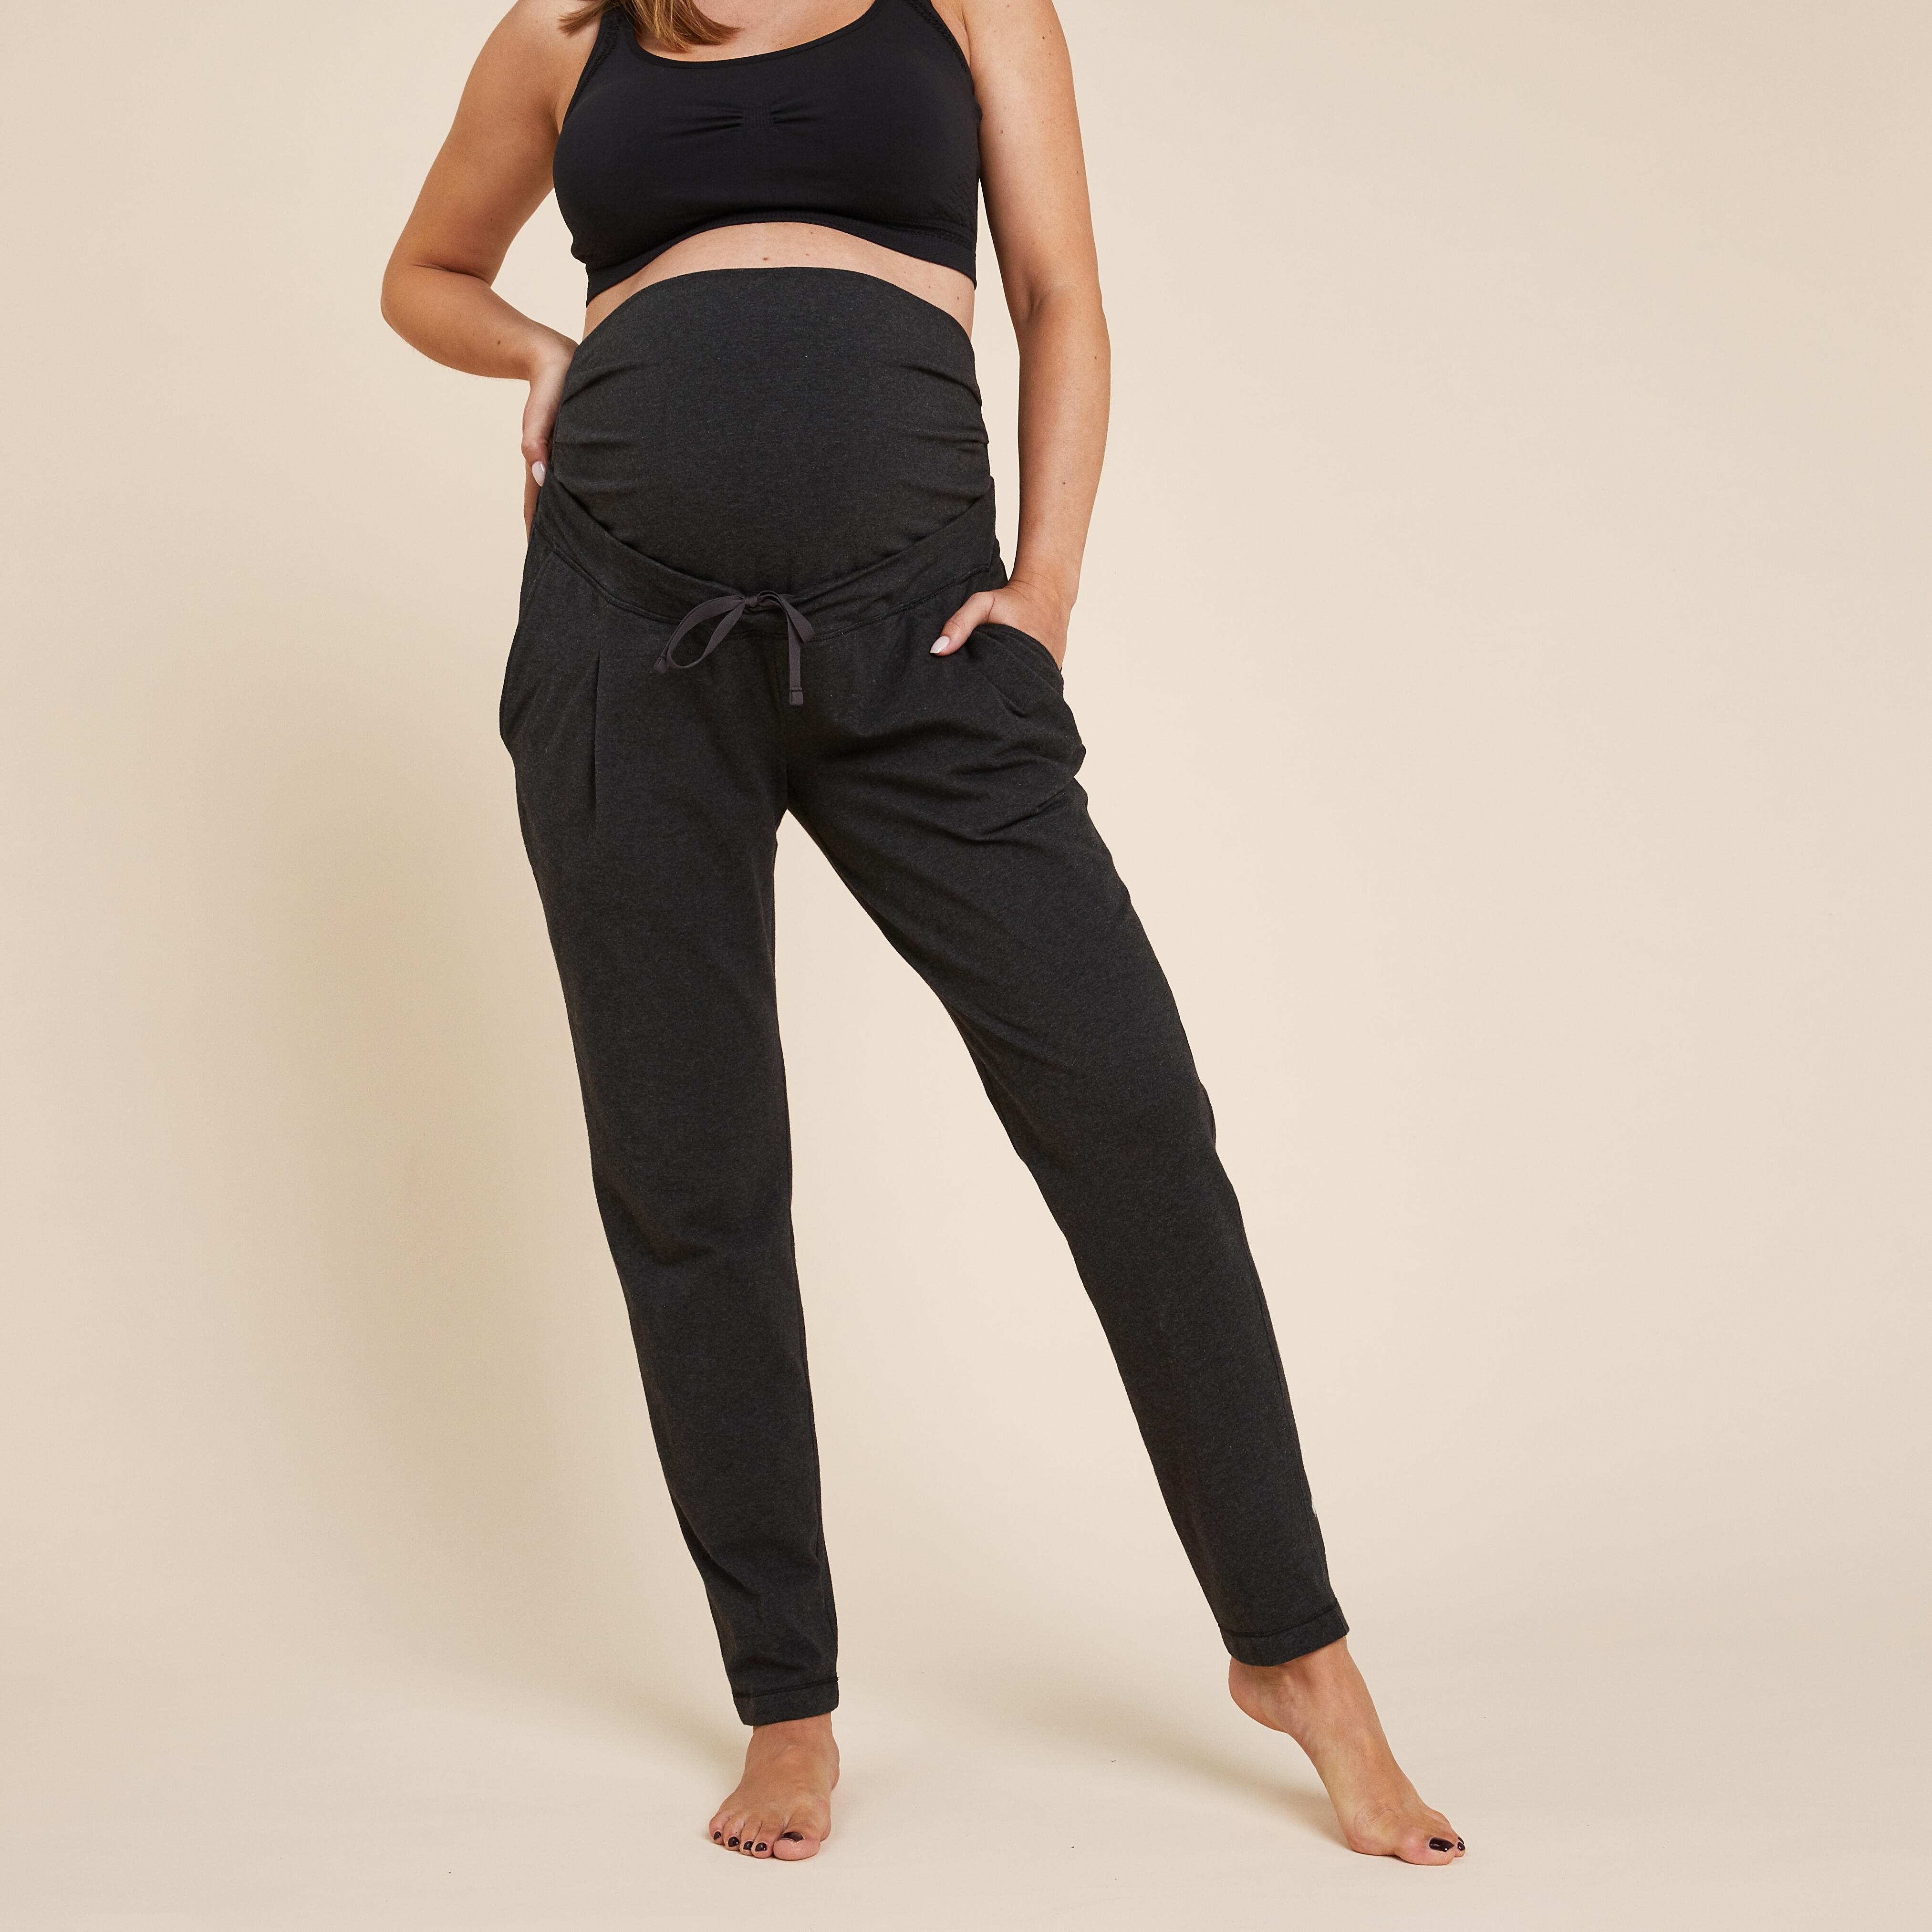 Maternity Yoga Clothes What to Wear When Pregnant Nikecom